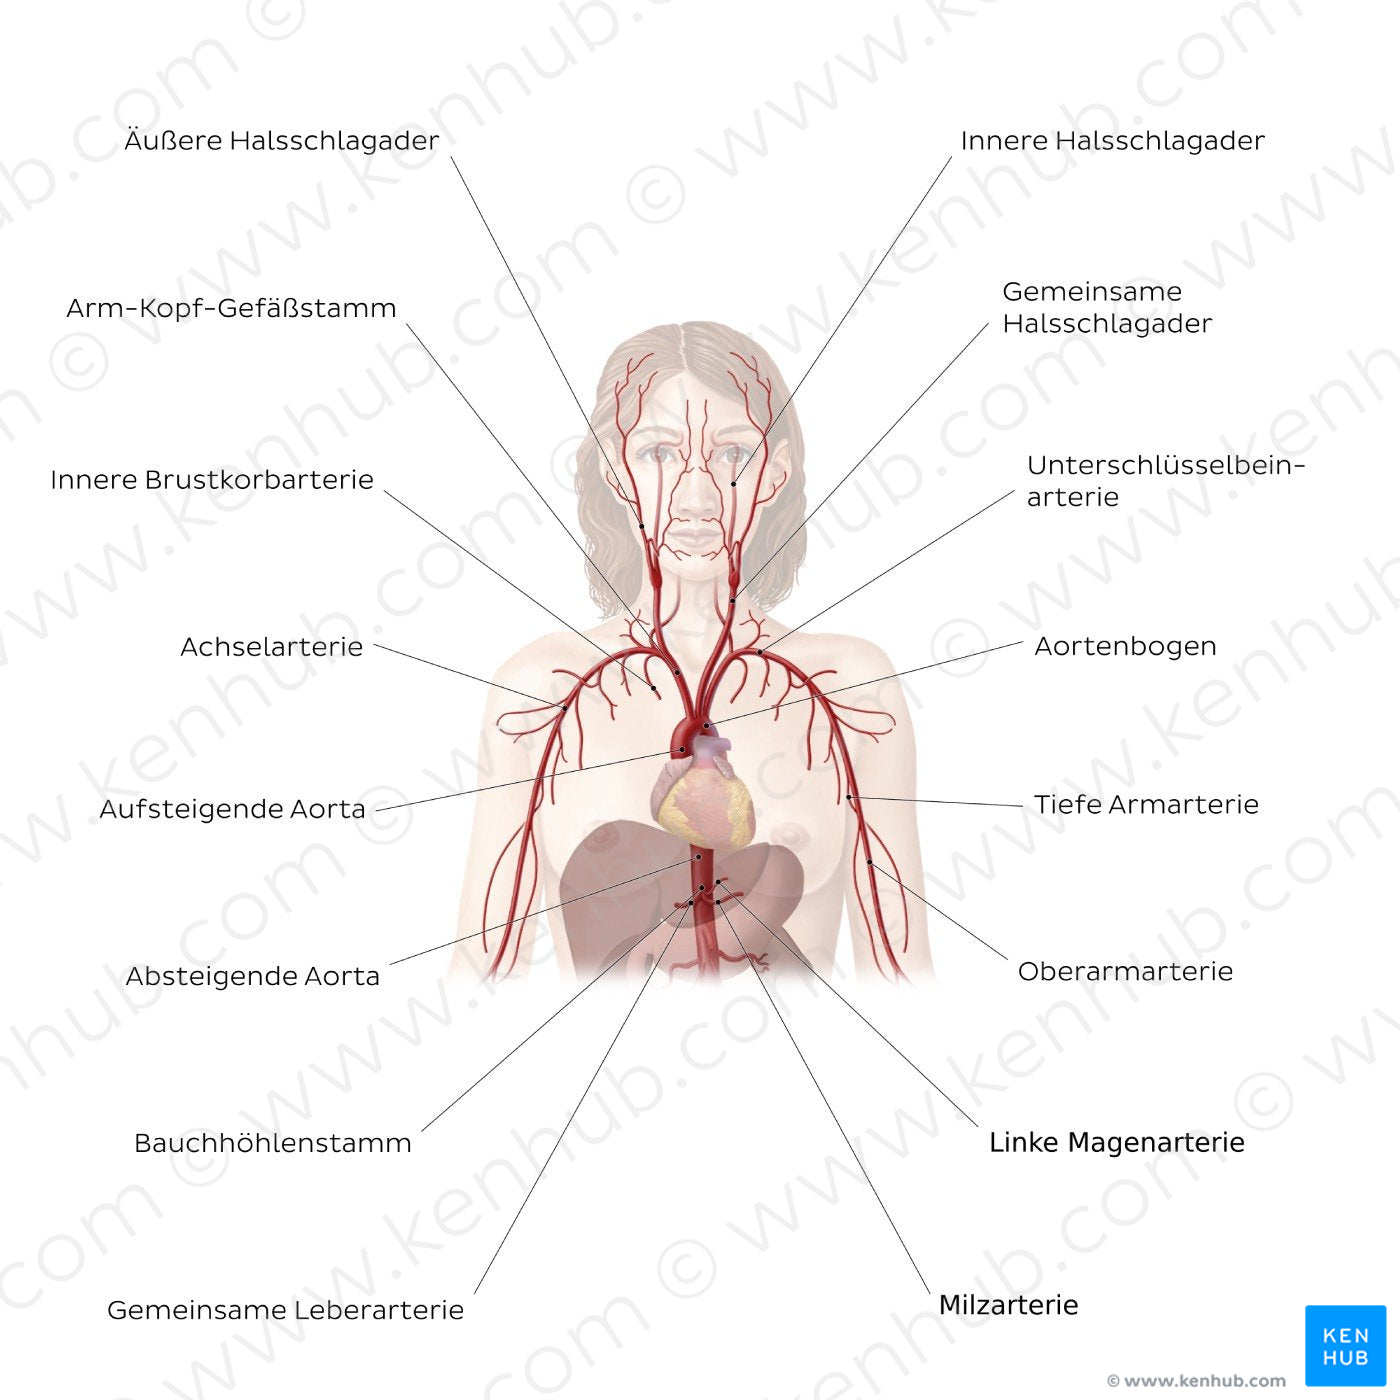 Cardiovascular system: Arteries of the upper part of the body (German)